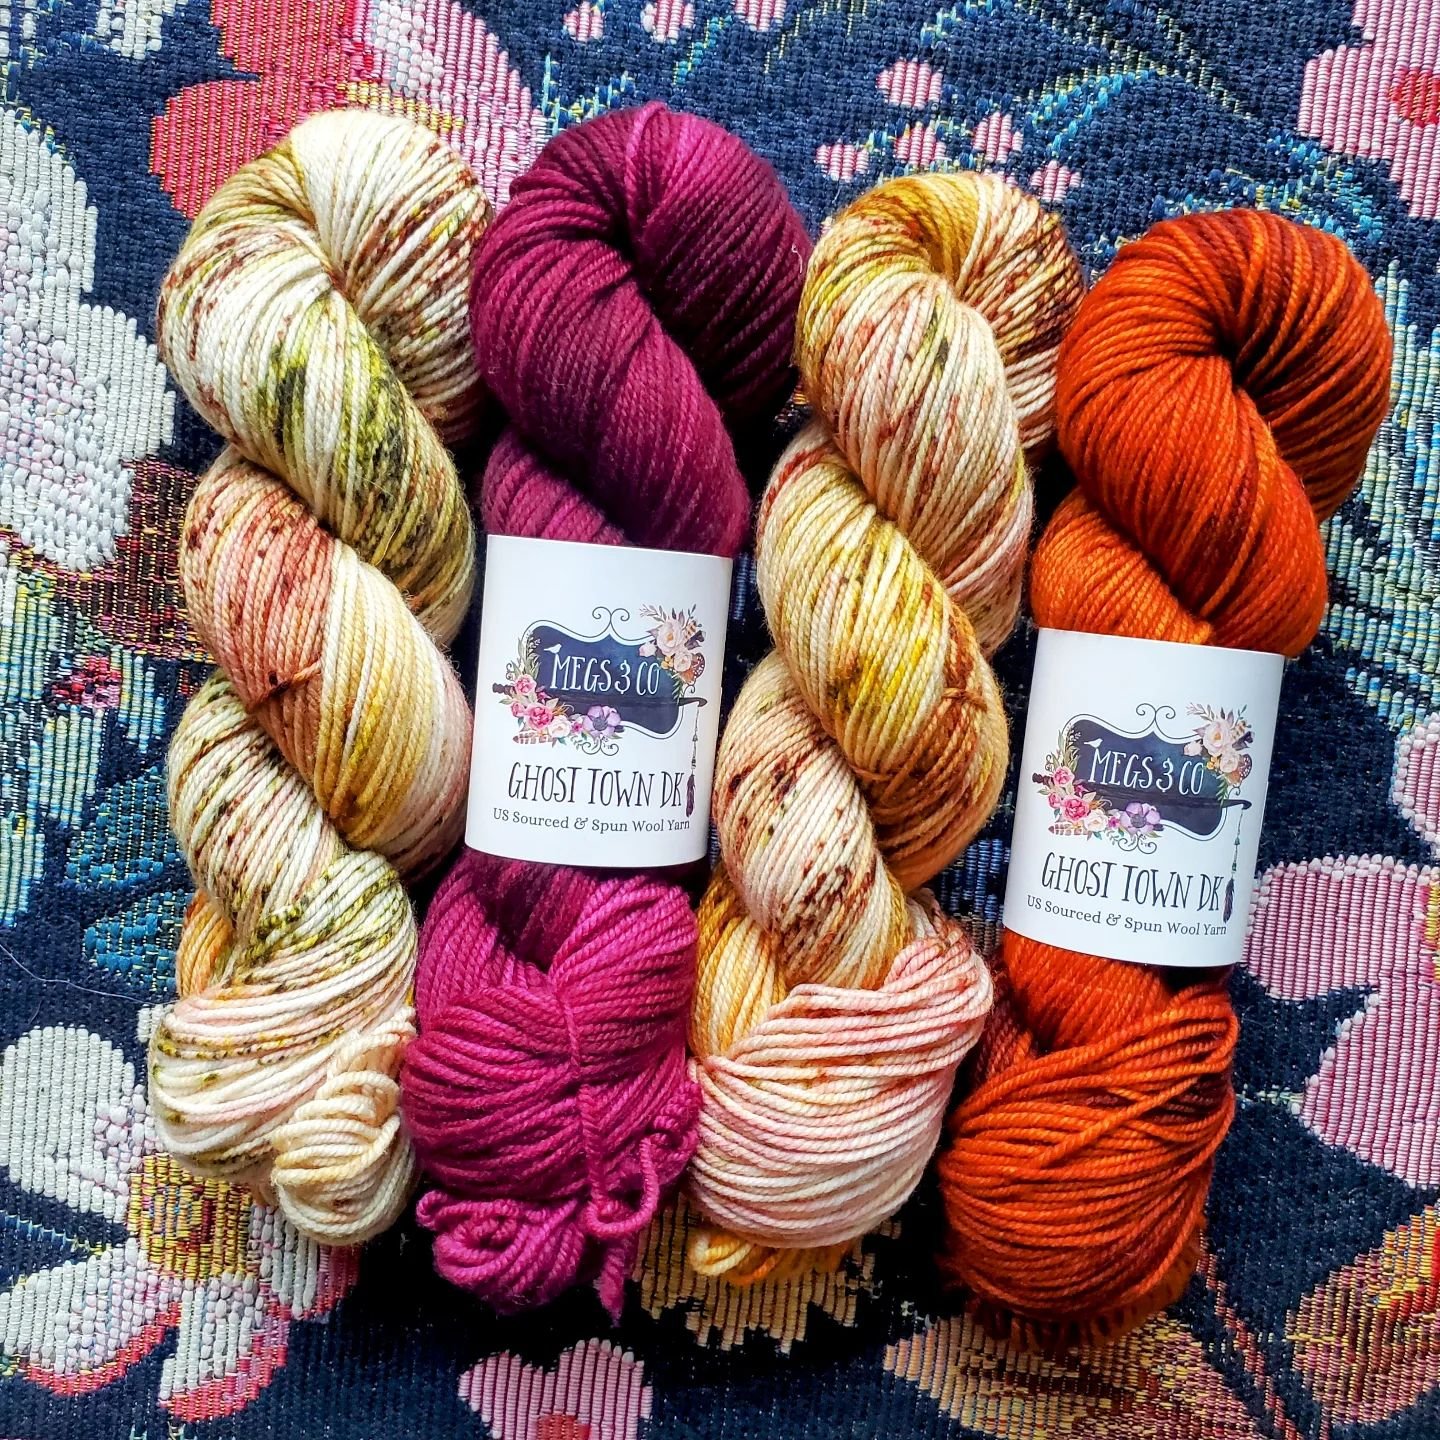 This color is ready for spring migration 🧡🦋💛

Pre-orders are closing soon for Monarch Chandelier, the colorway I created for the spring edition of Knitting our National Parks by @indieuntangled 

Lightly speckled in an earthy blend of peach, orang